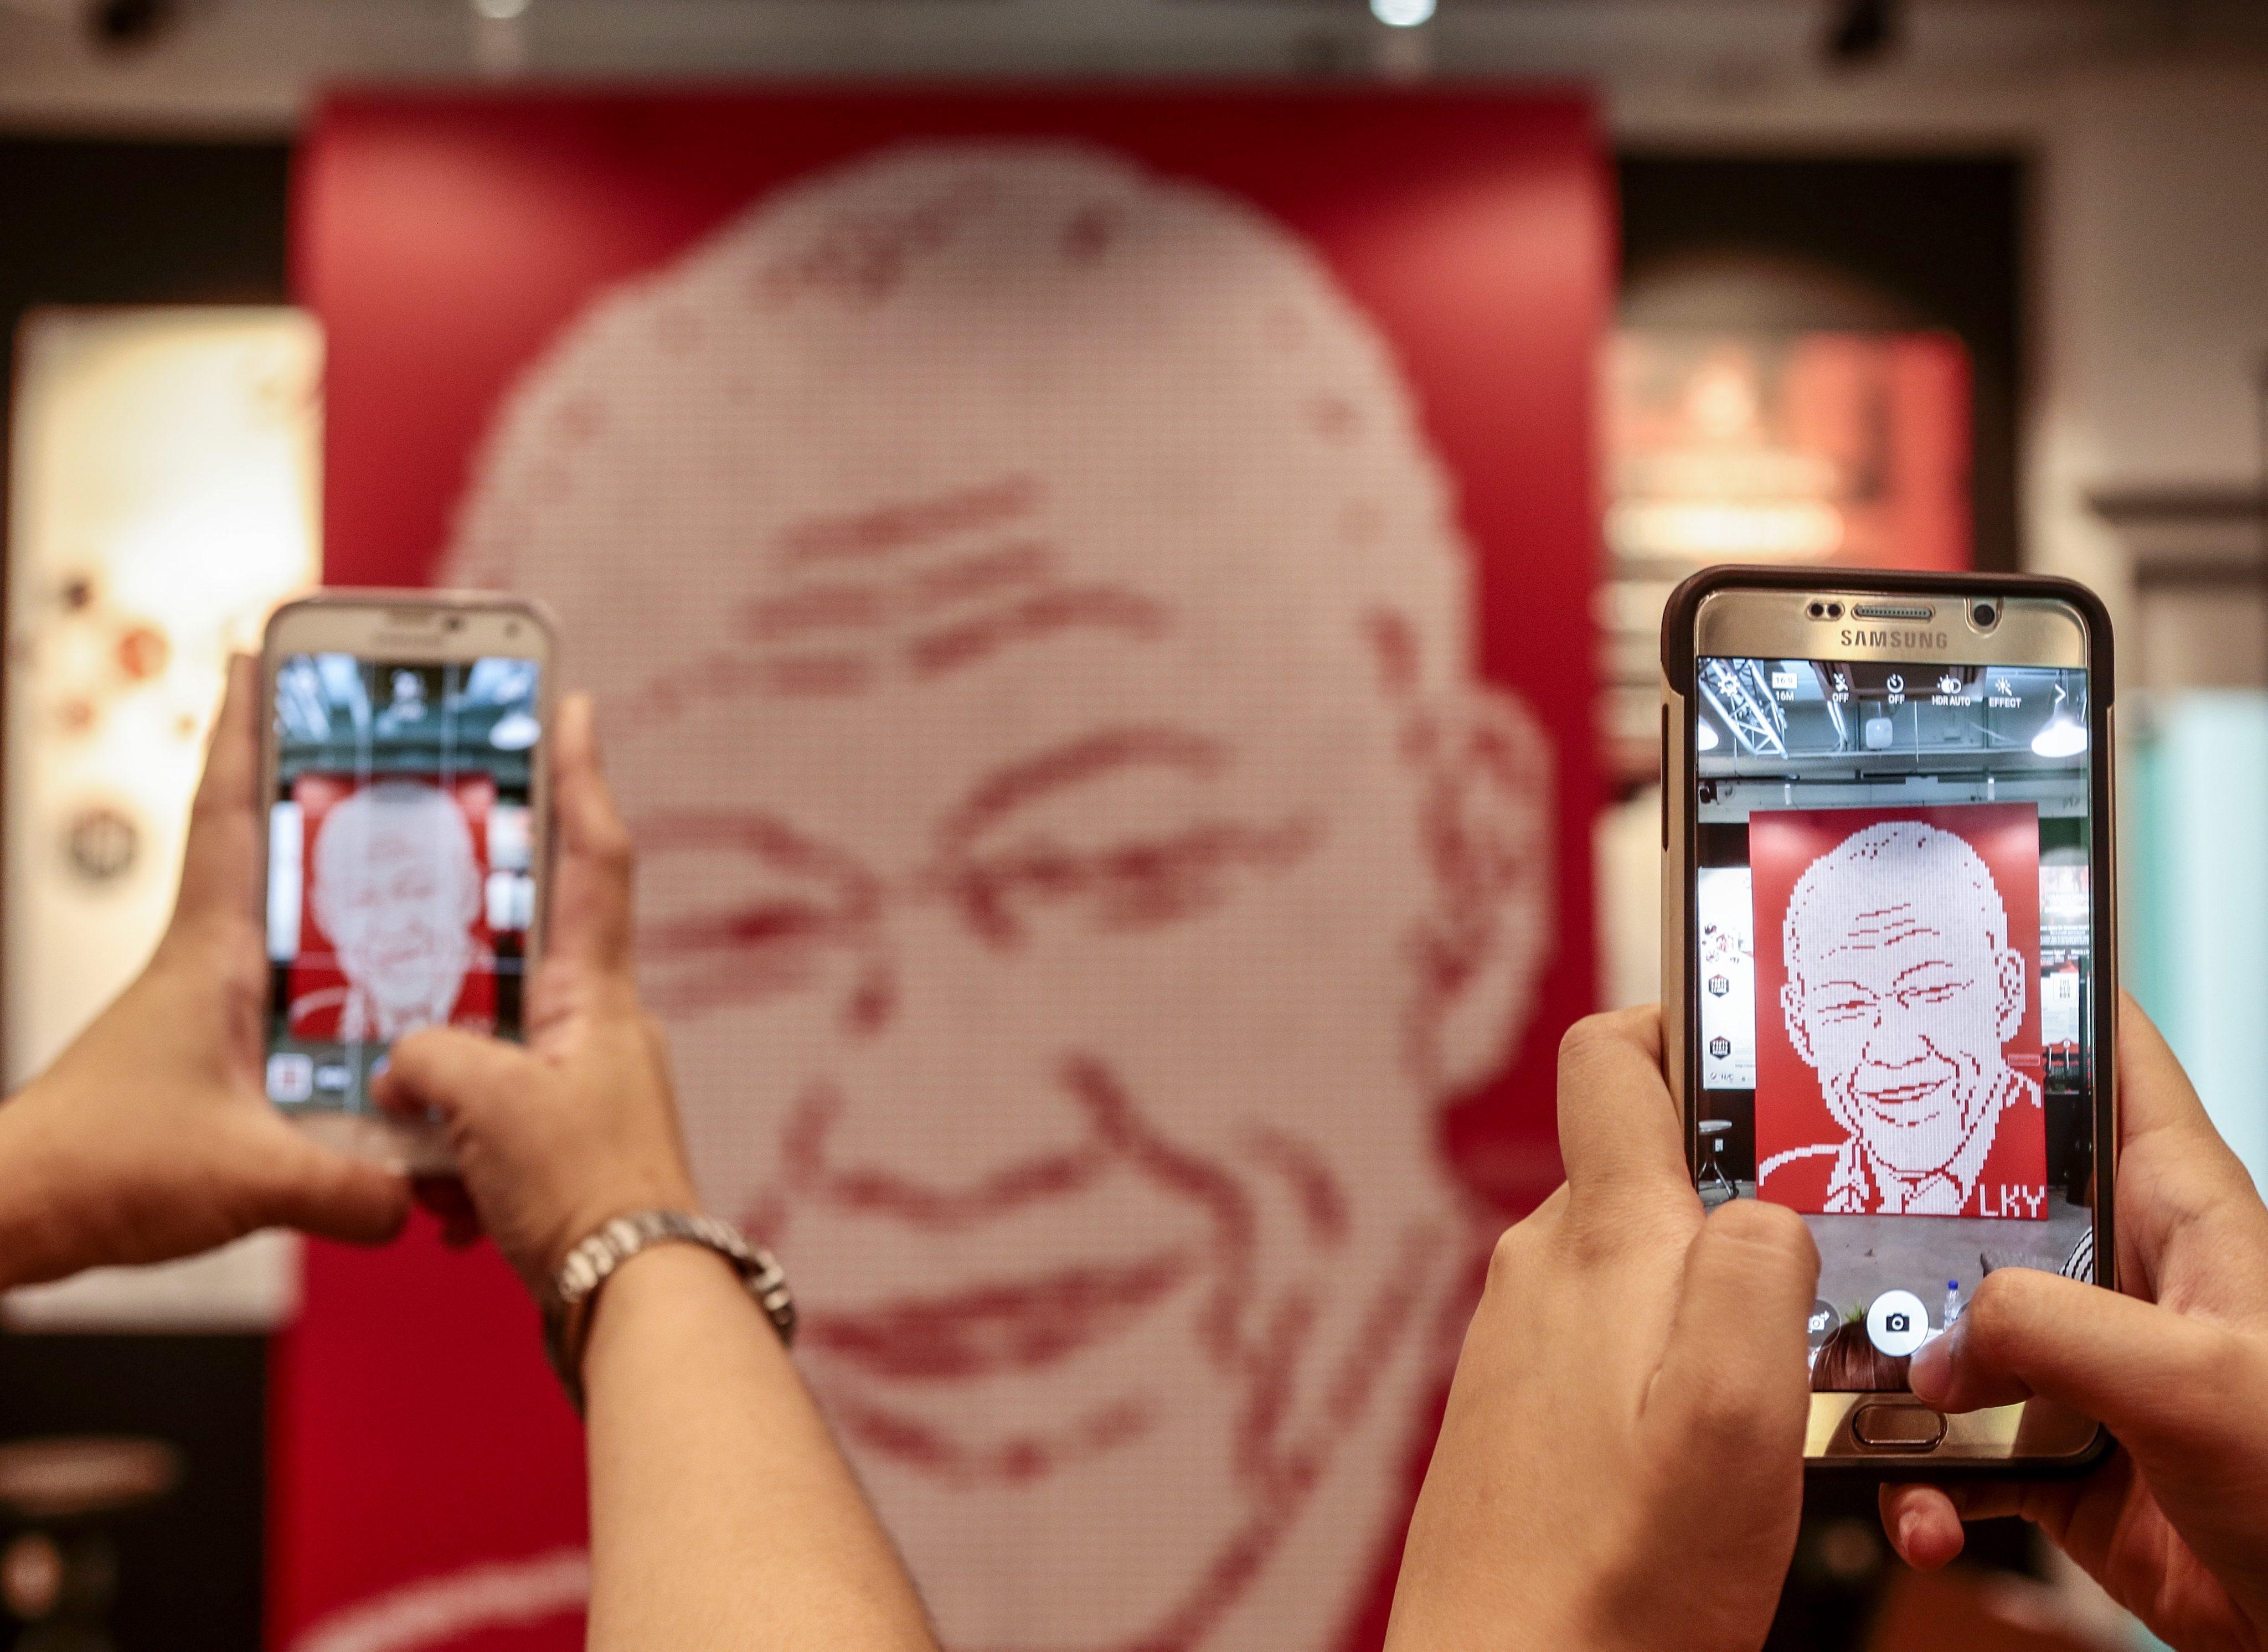 Visitors take photographs of a mural featuring the likeness of Lee Kuan Yew, during a tribute event in Singapore in 2016. The late political patriarch is said to have been vehemently opposed to having a personality cult growing around him. Photo: EPA